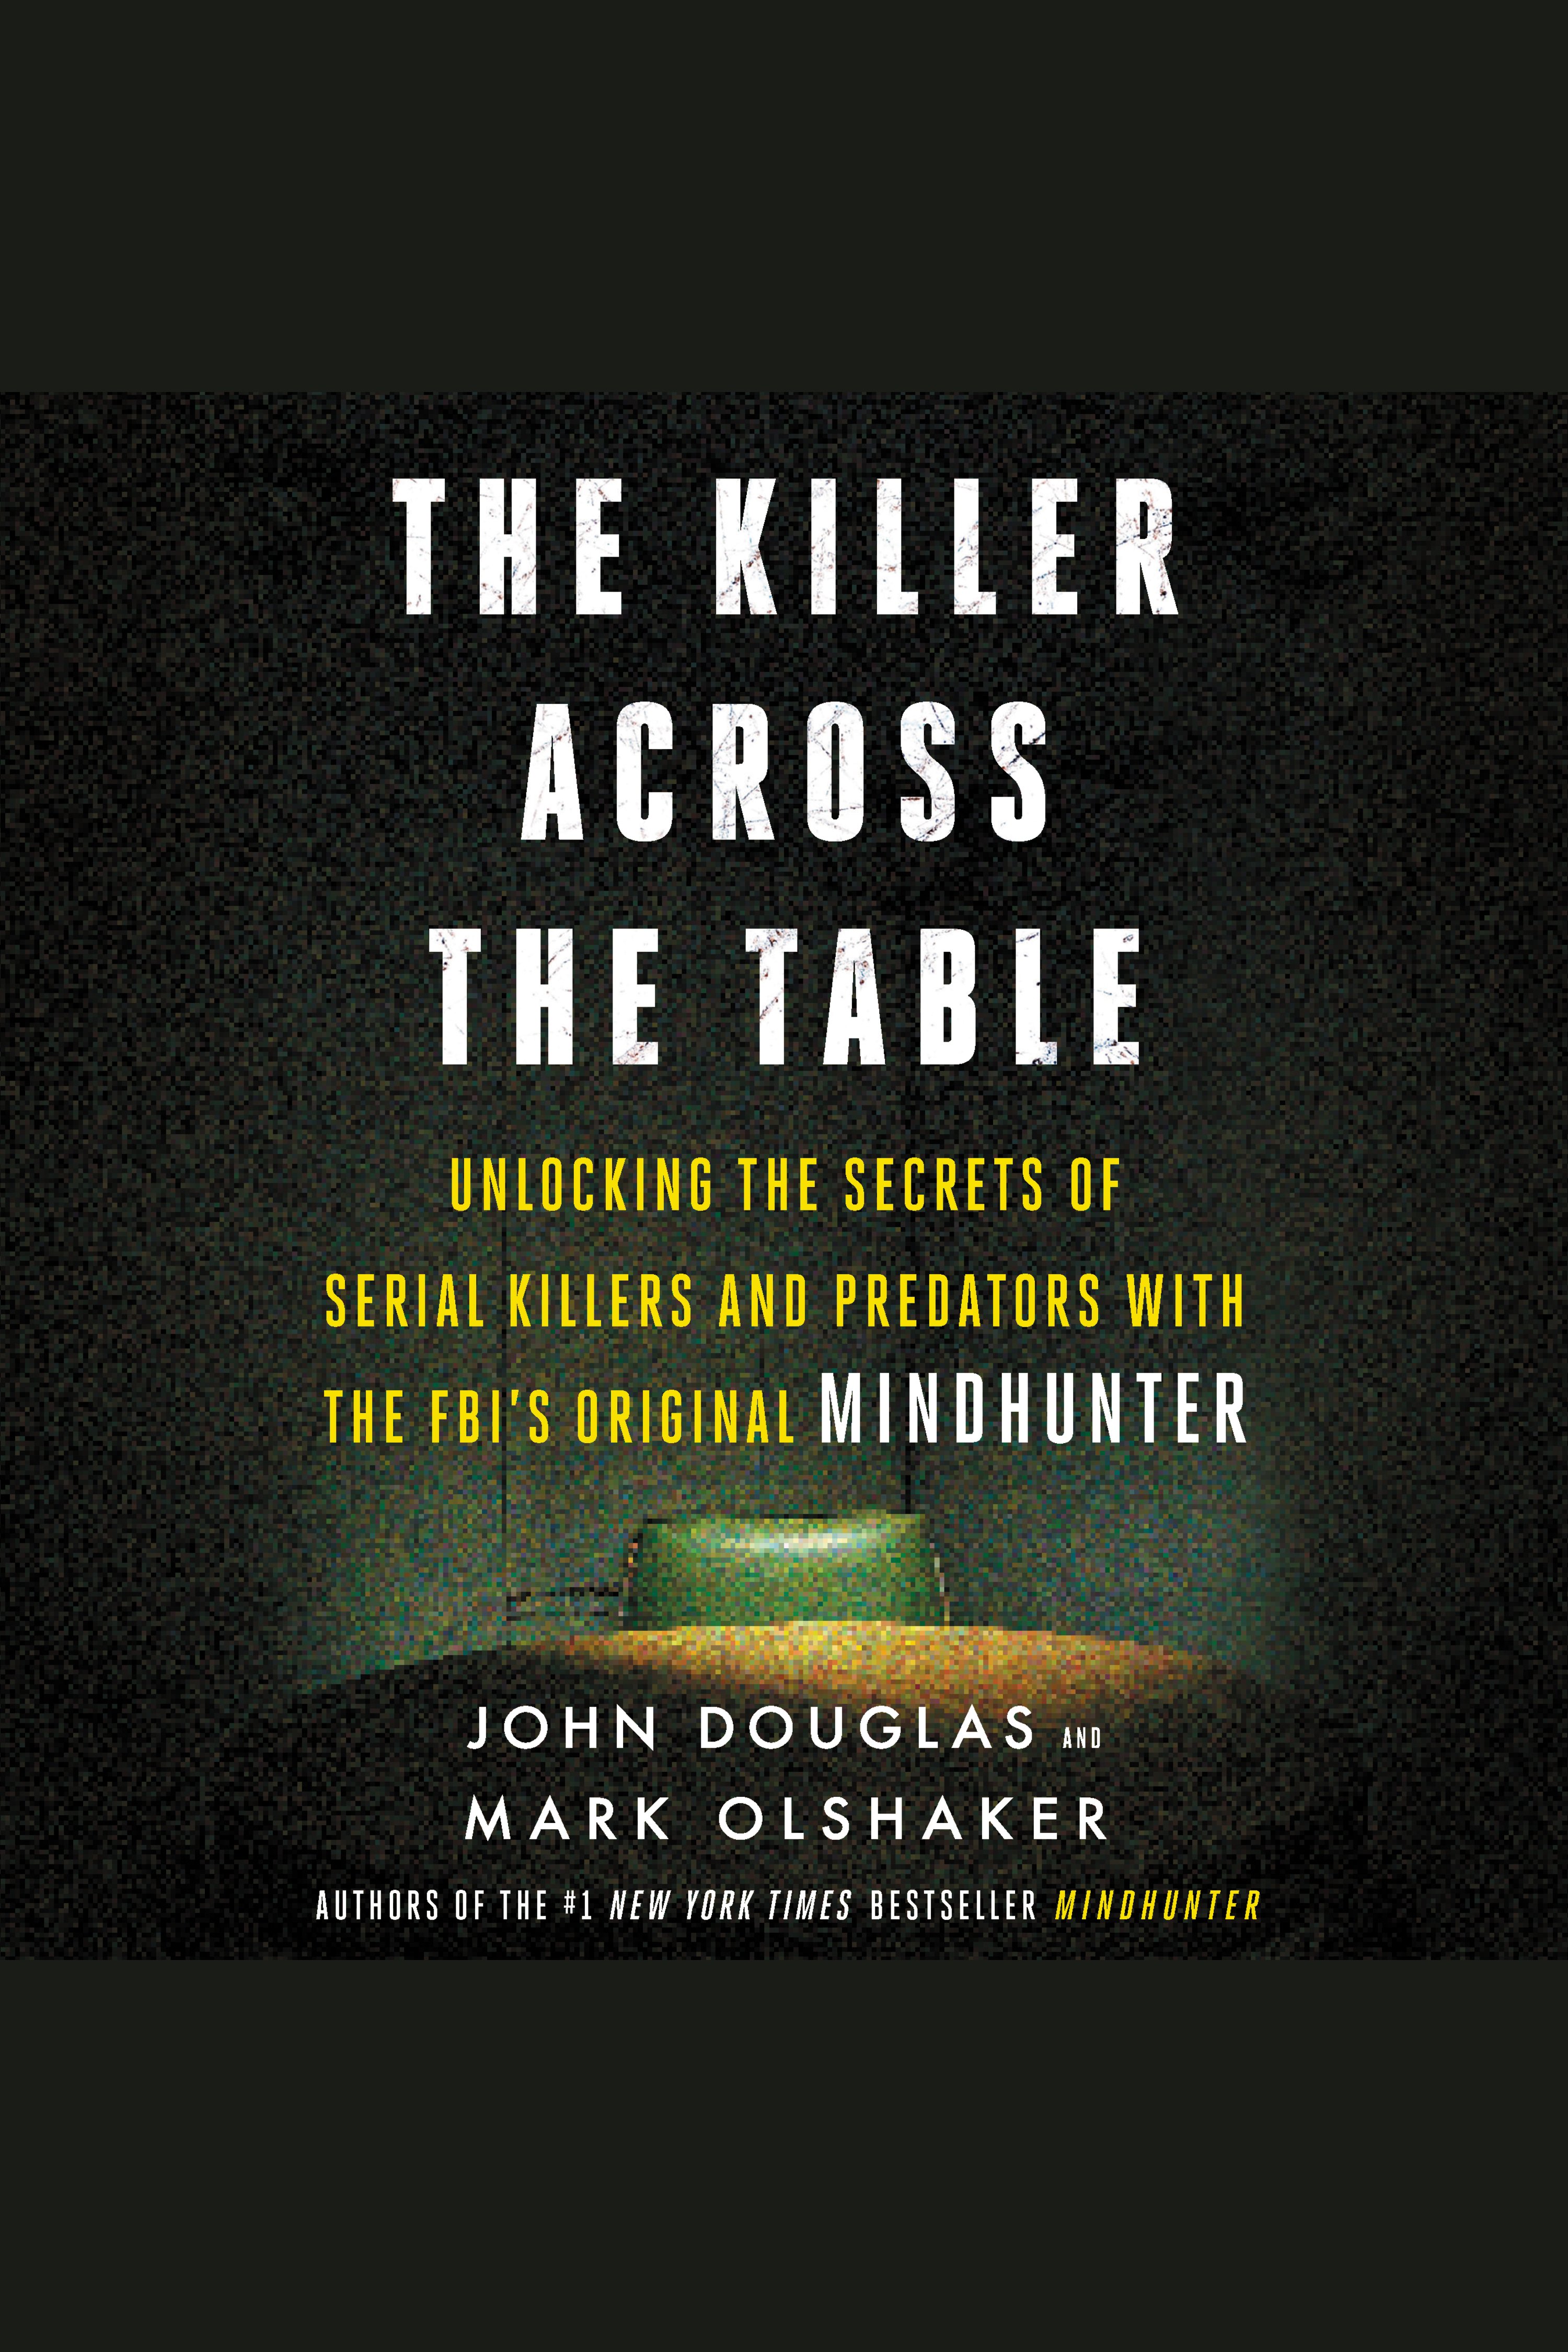 Image de couverture de The Killer Across the Table [electronic resource] : Unlocking the Secrets of Serial Killers and Predators with the FBI's Original Mindhunter